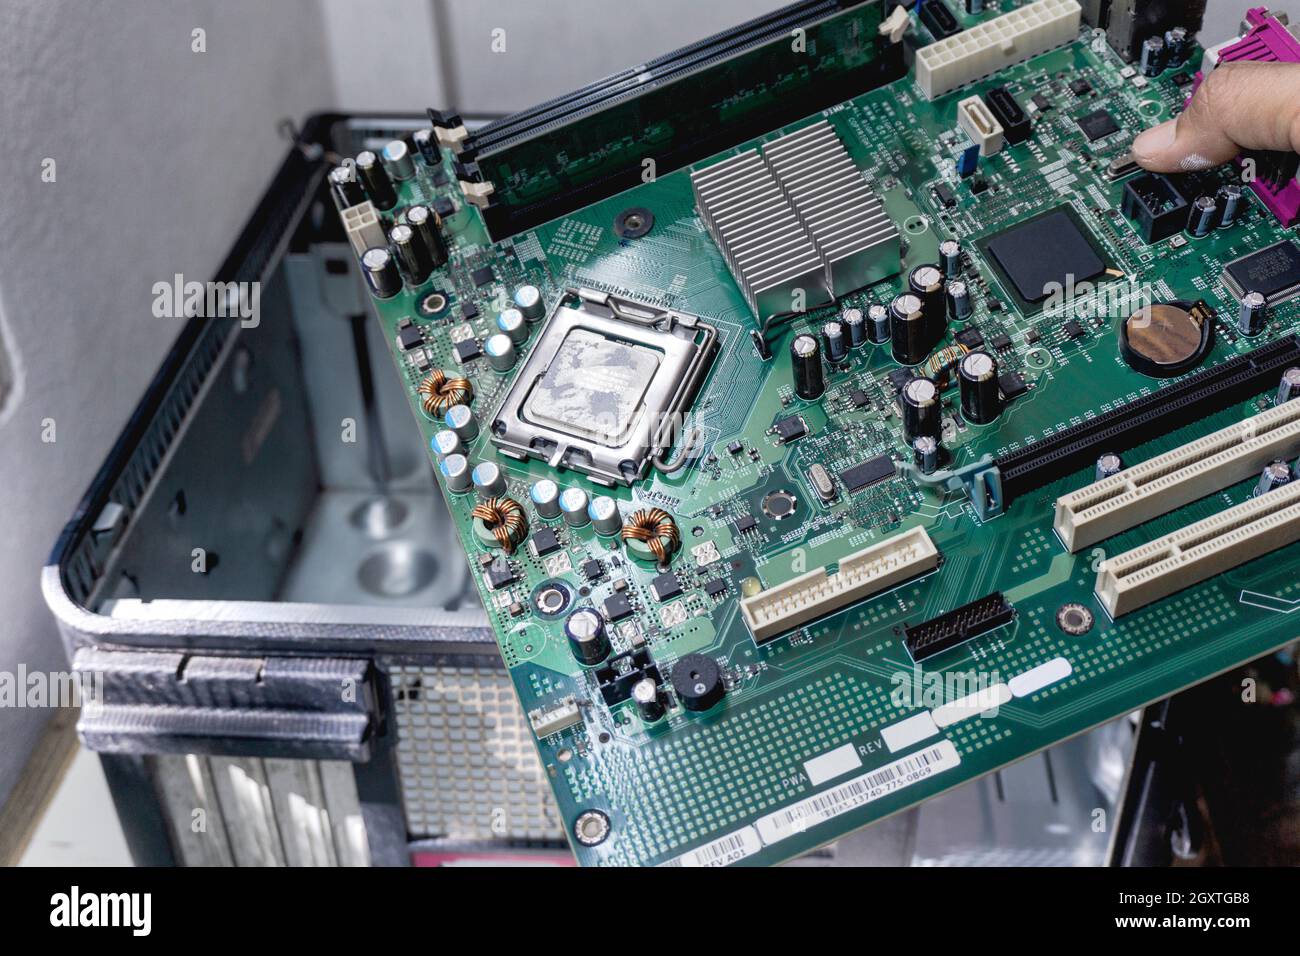 The technician holds a board computer pc for the upgrade to repair inside The socket motherboard or equipment. Computer upgrade center concept Stock Photo